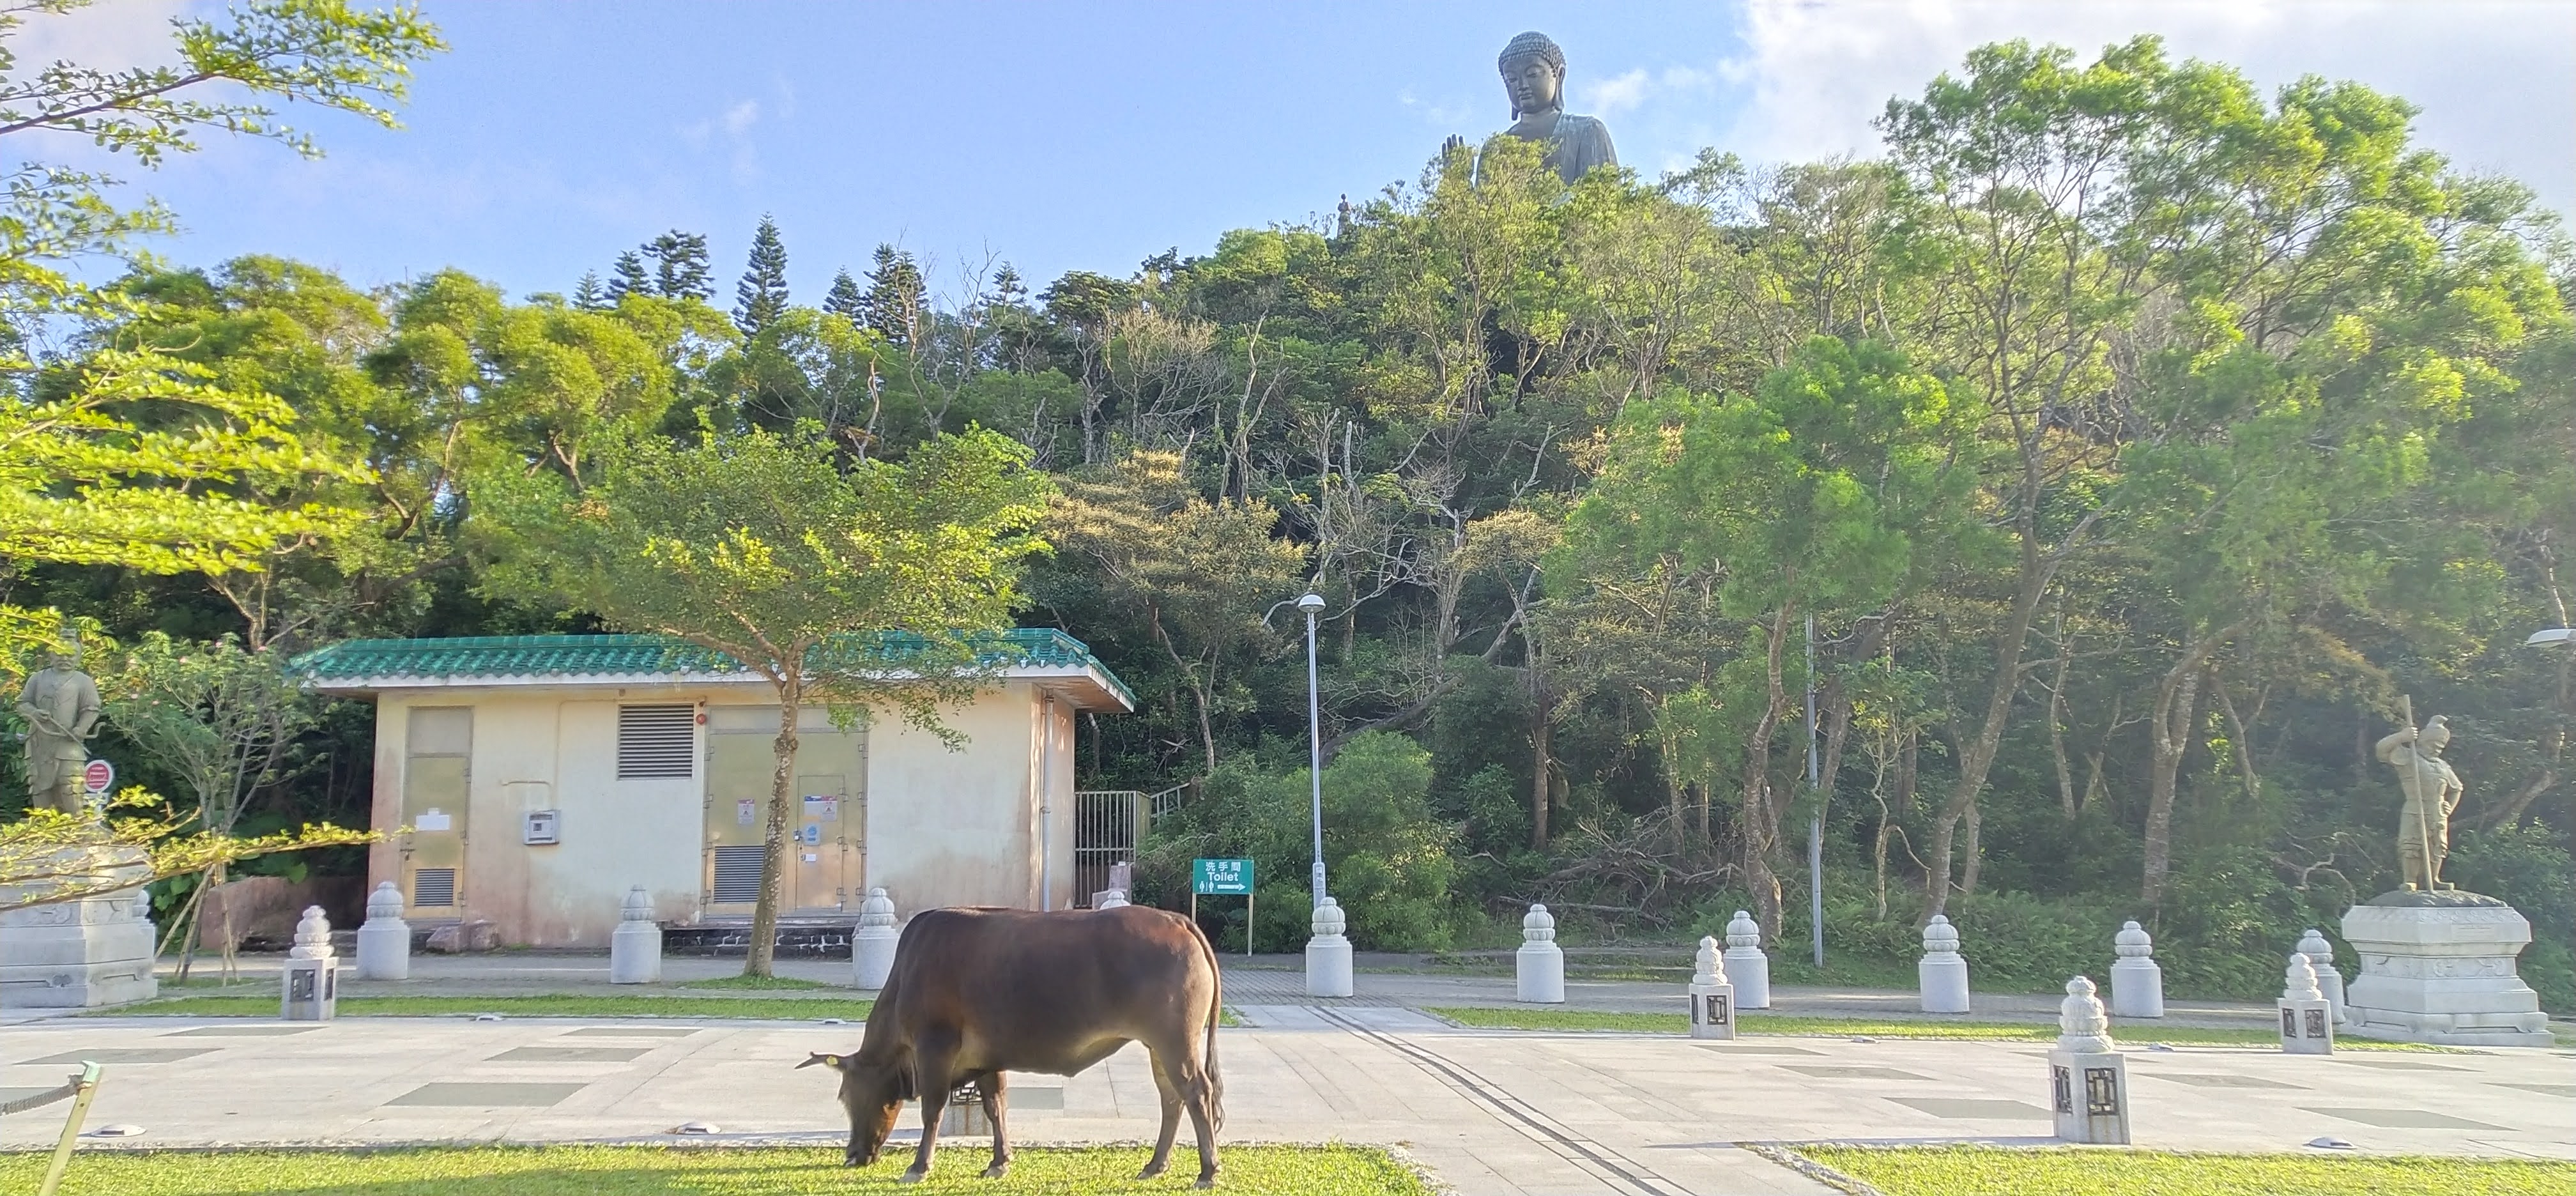 Cow is eating grass under the Big Buddha